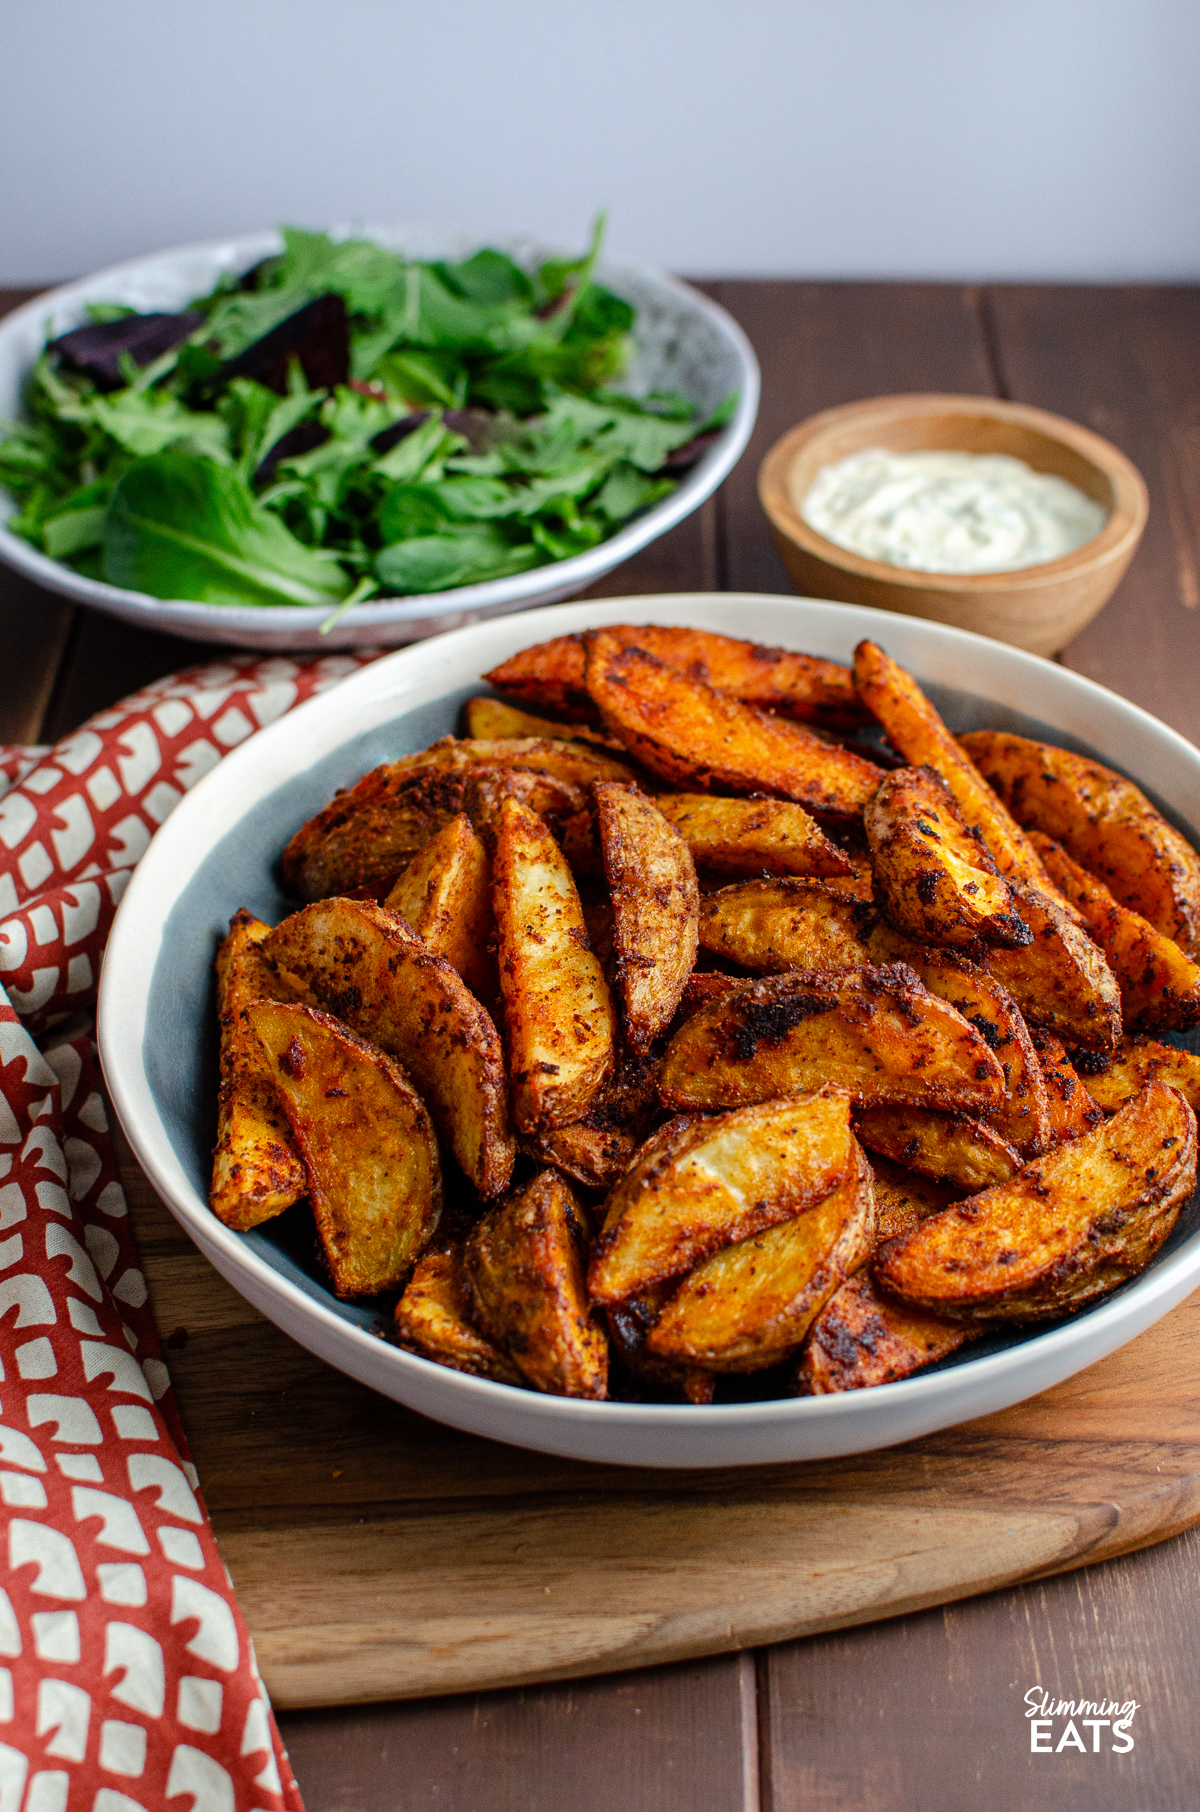 Spicy potato wedges in a blue-gray bowl with white rim, accompanied by salad and garlic dip in the background.